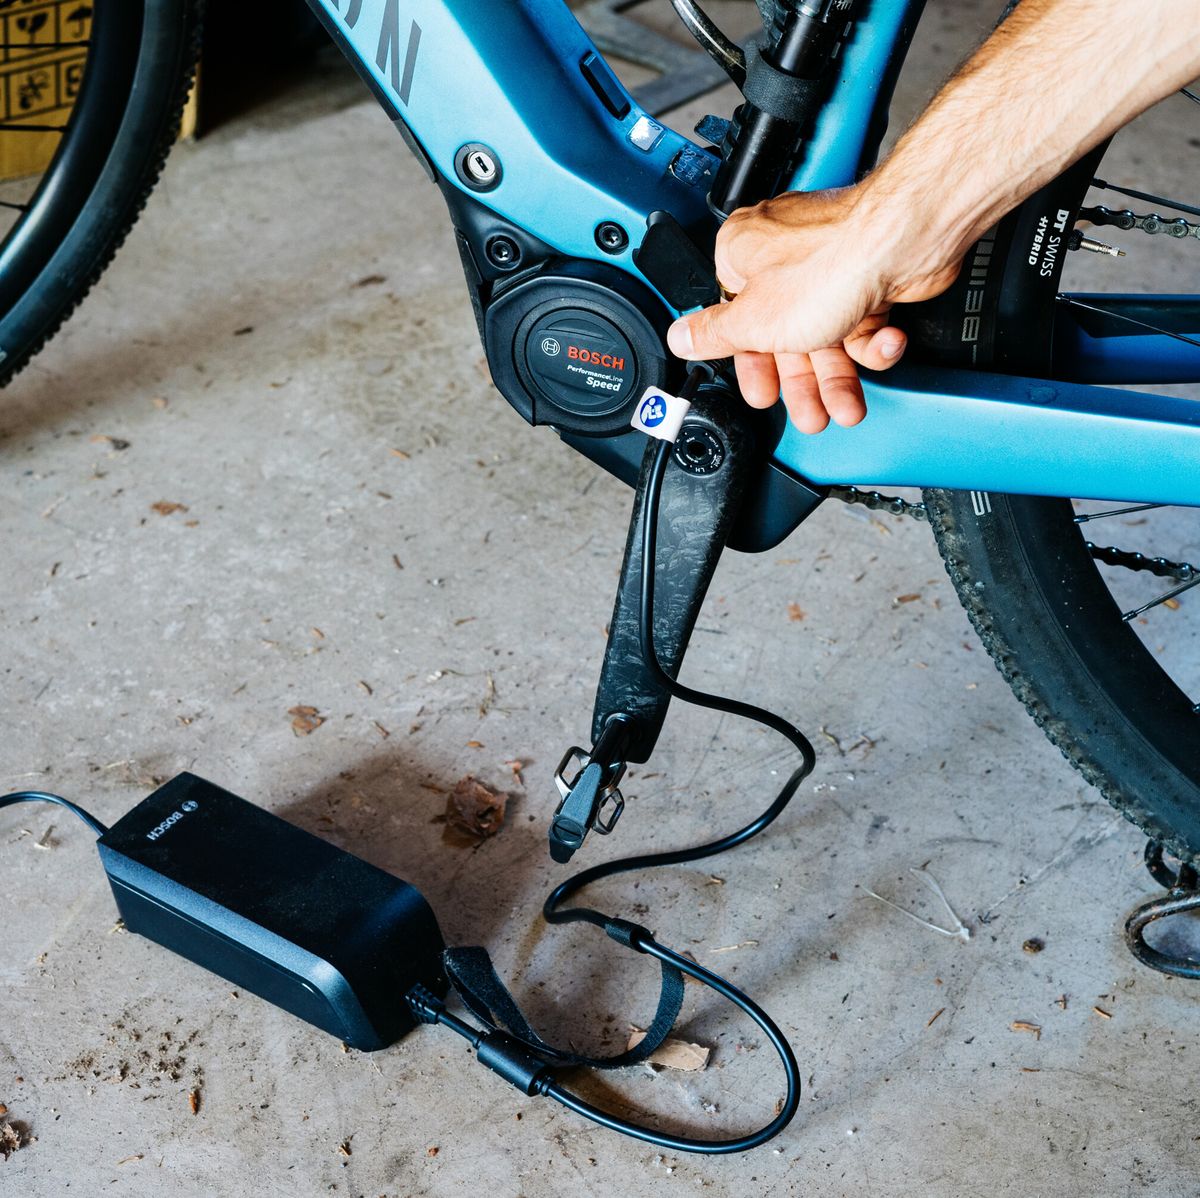 Zo snel als een flits laten vallen wees stil How to Charge an E-Bike: Guide to Safely Charging an Electric Bike